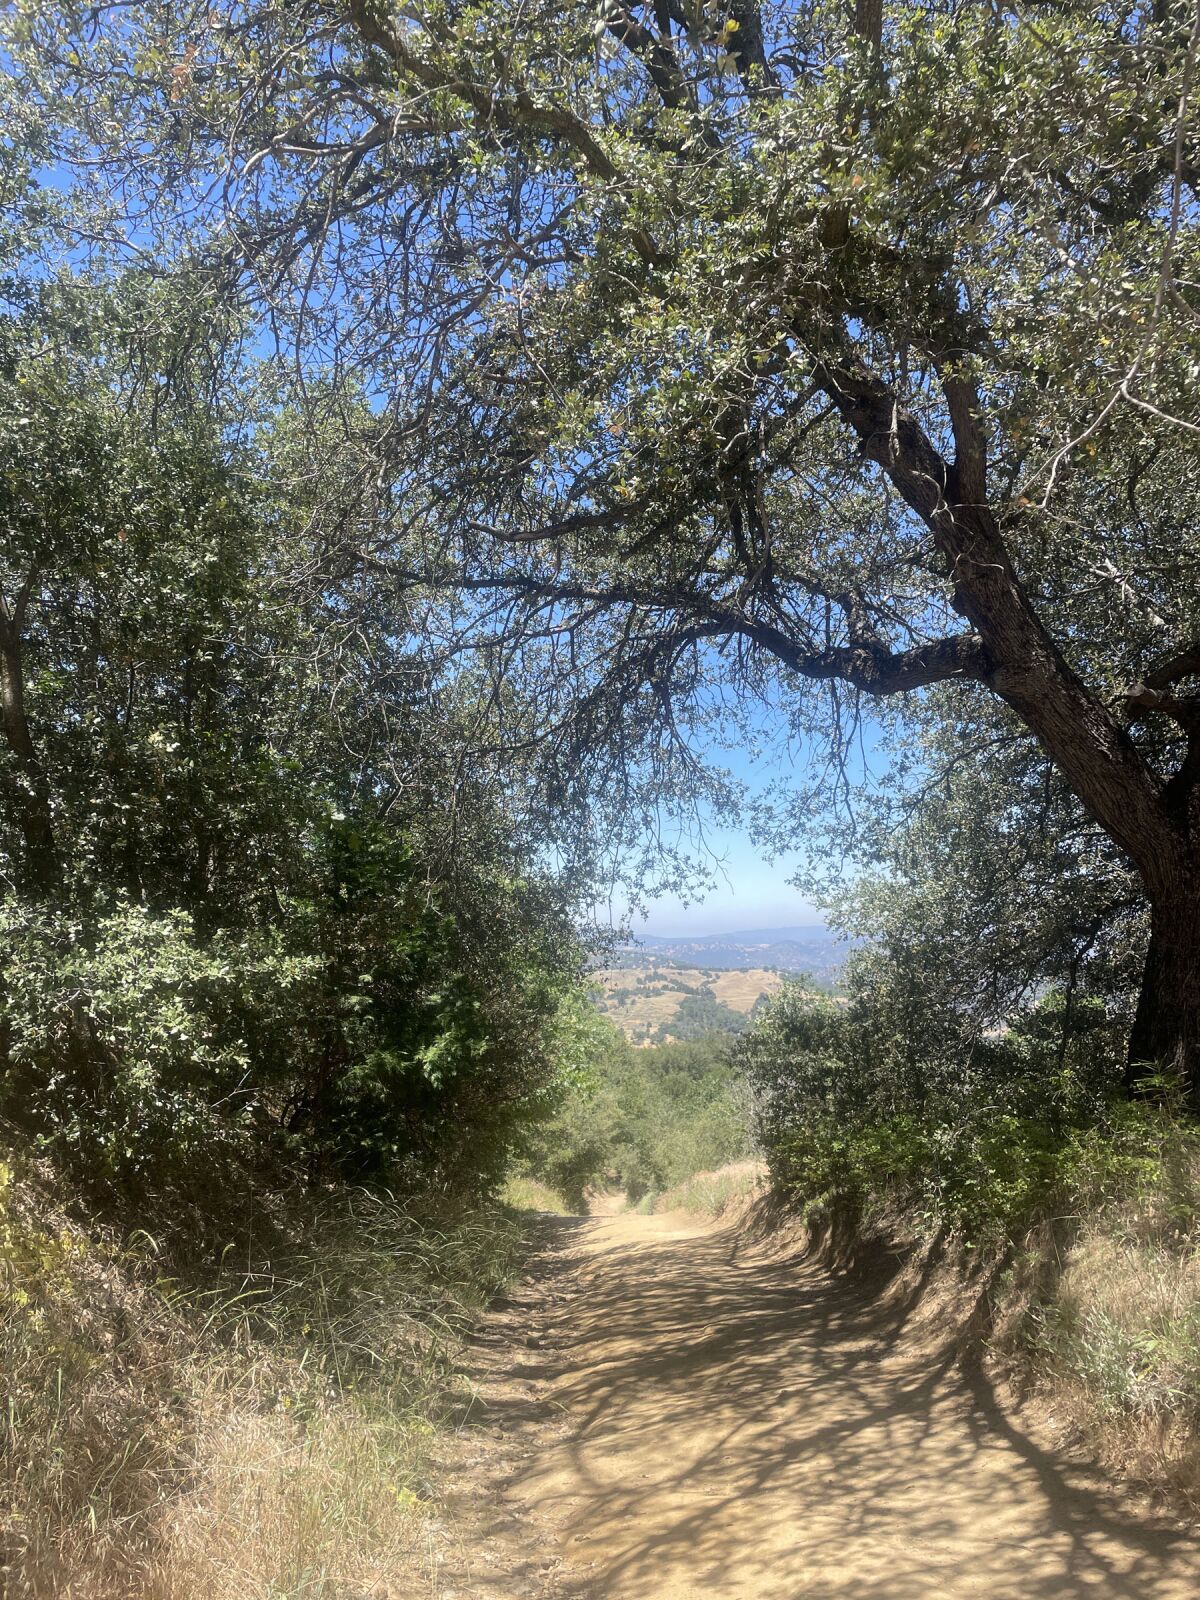 A part of the Volcan Mountain via Five Oaks hike.